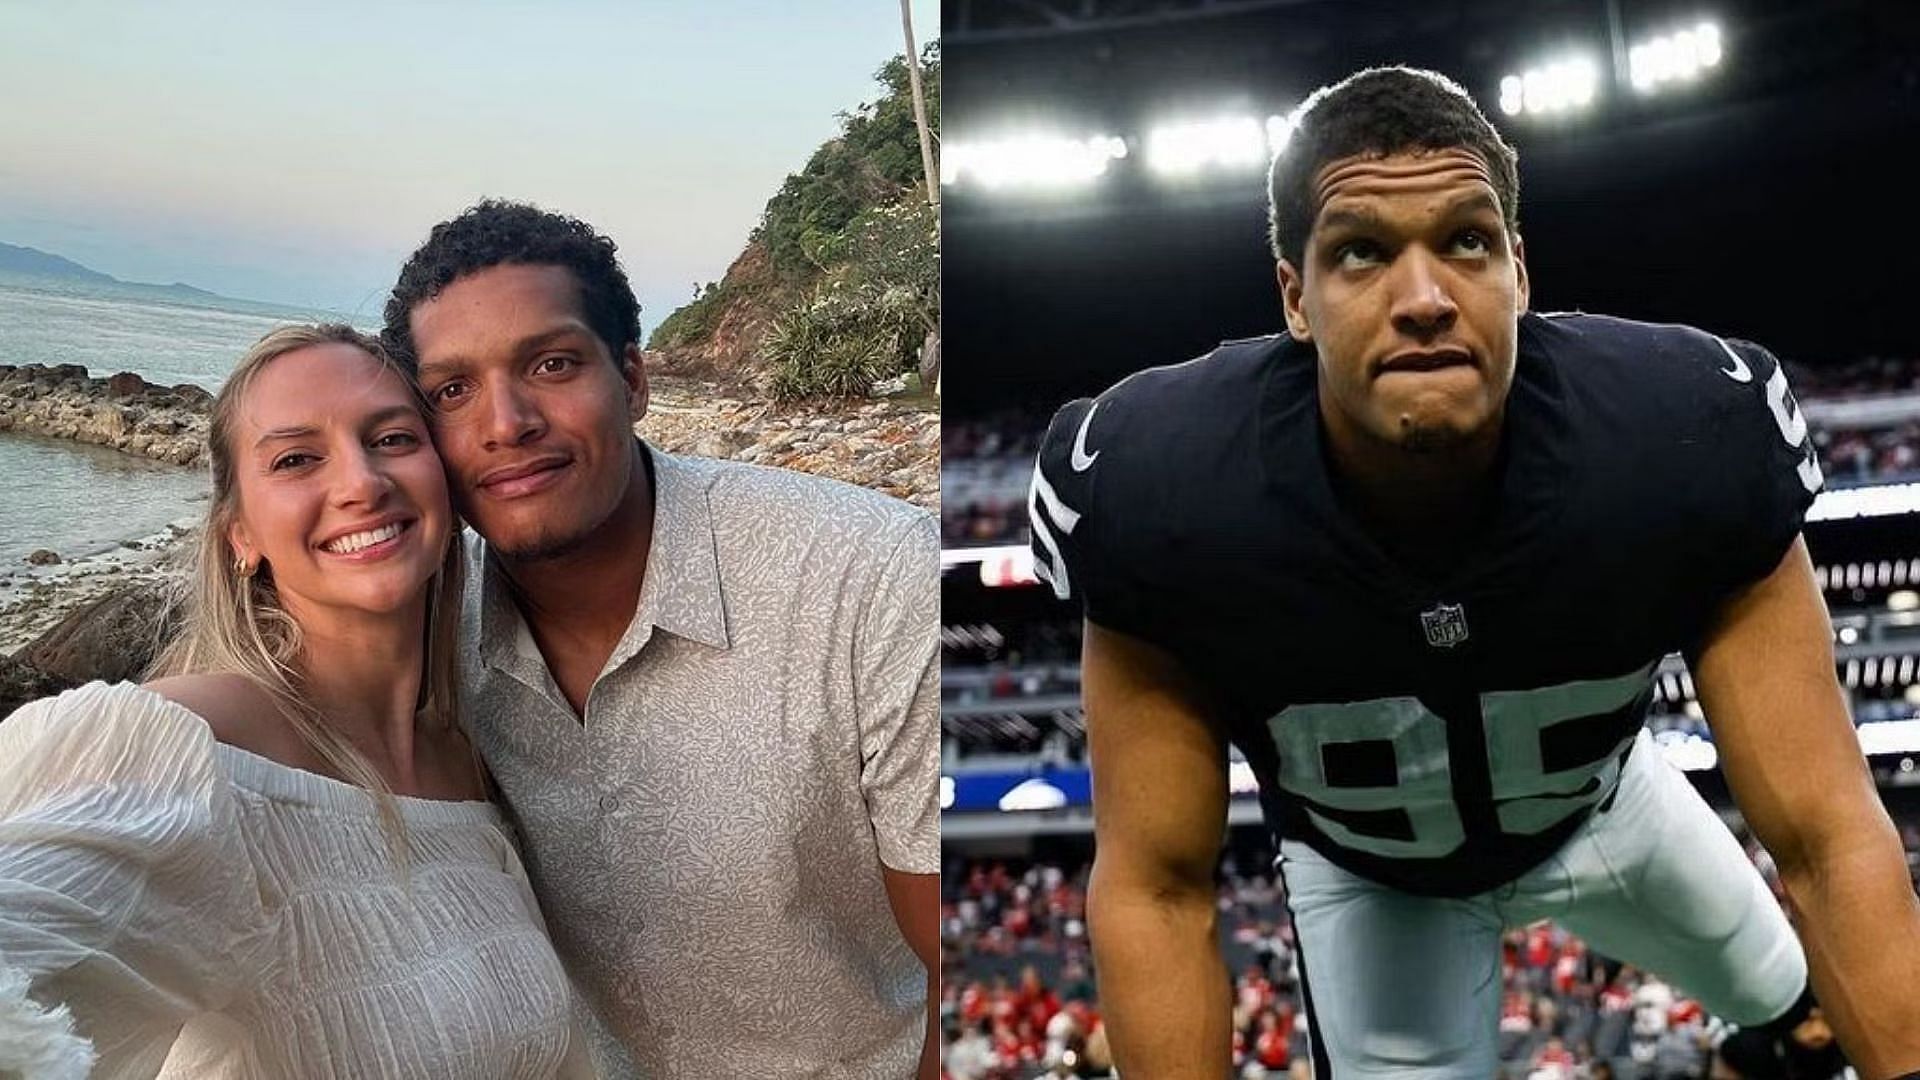 Allison Kuch films dramatic goodbye for Isaac Rochell jets off